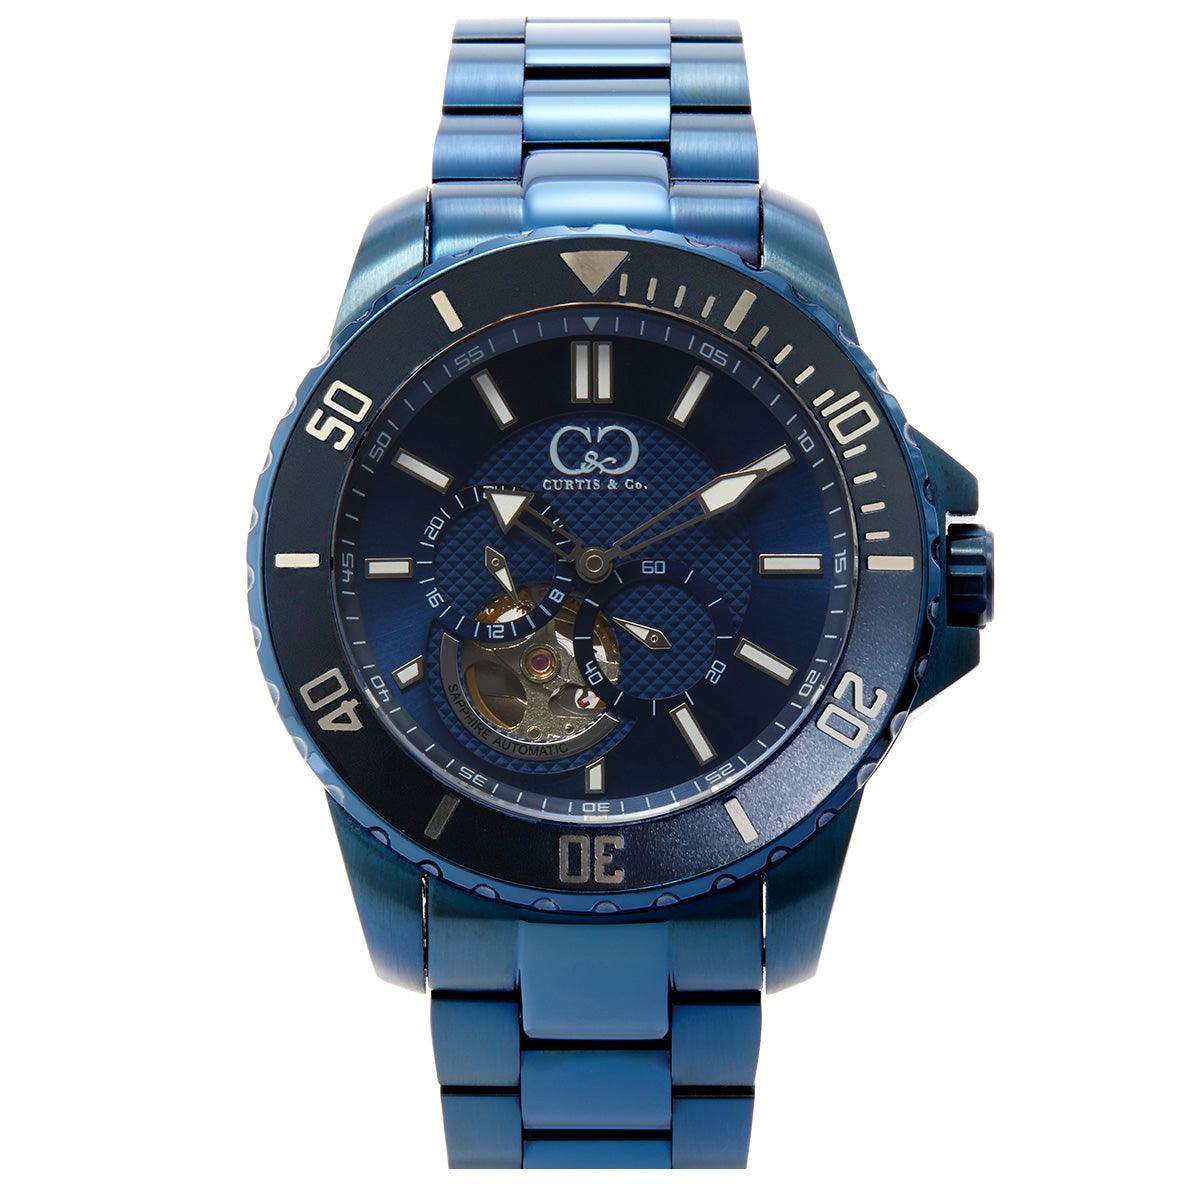 Curtis & Co BIG TIME ROYALE (45 mm) BLUE CASE / BLUE DIAL Watch - Flyclothing LLC